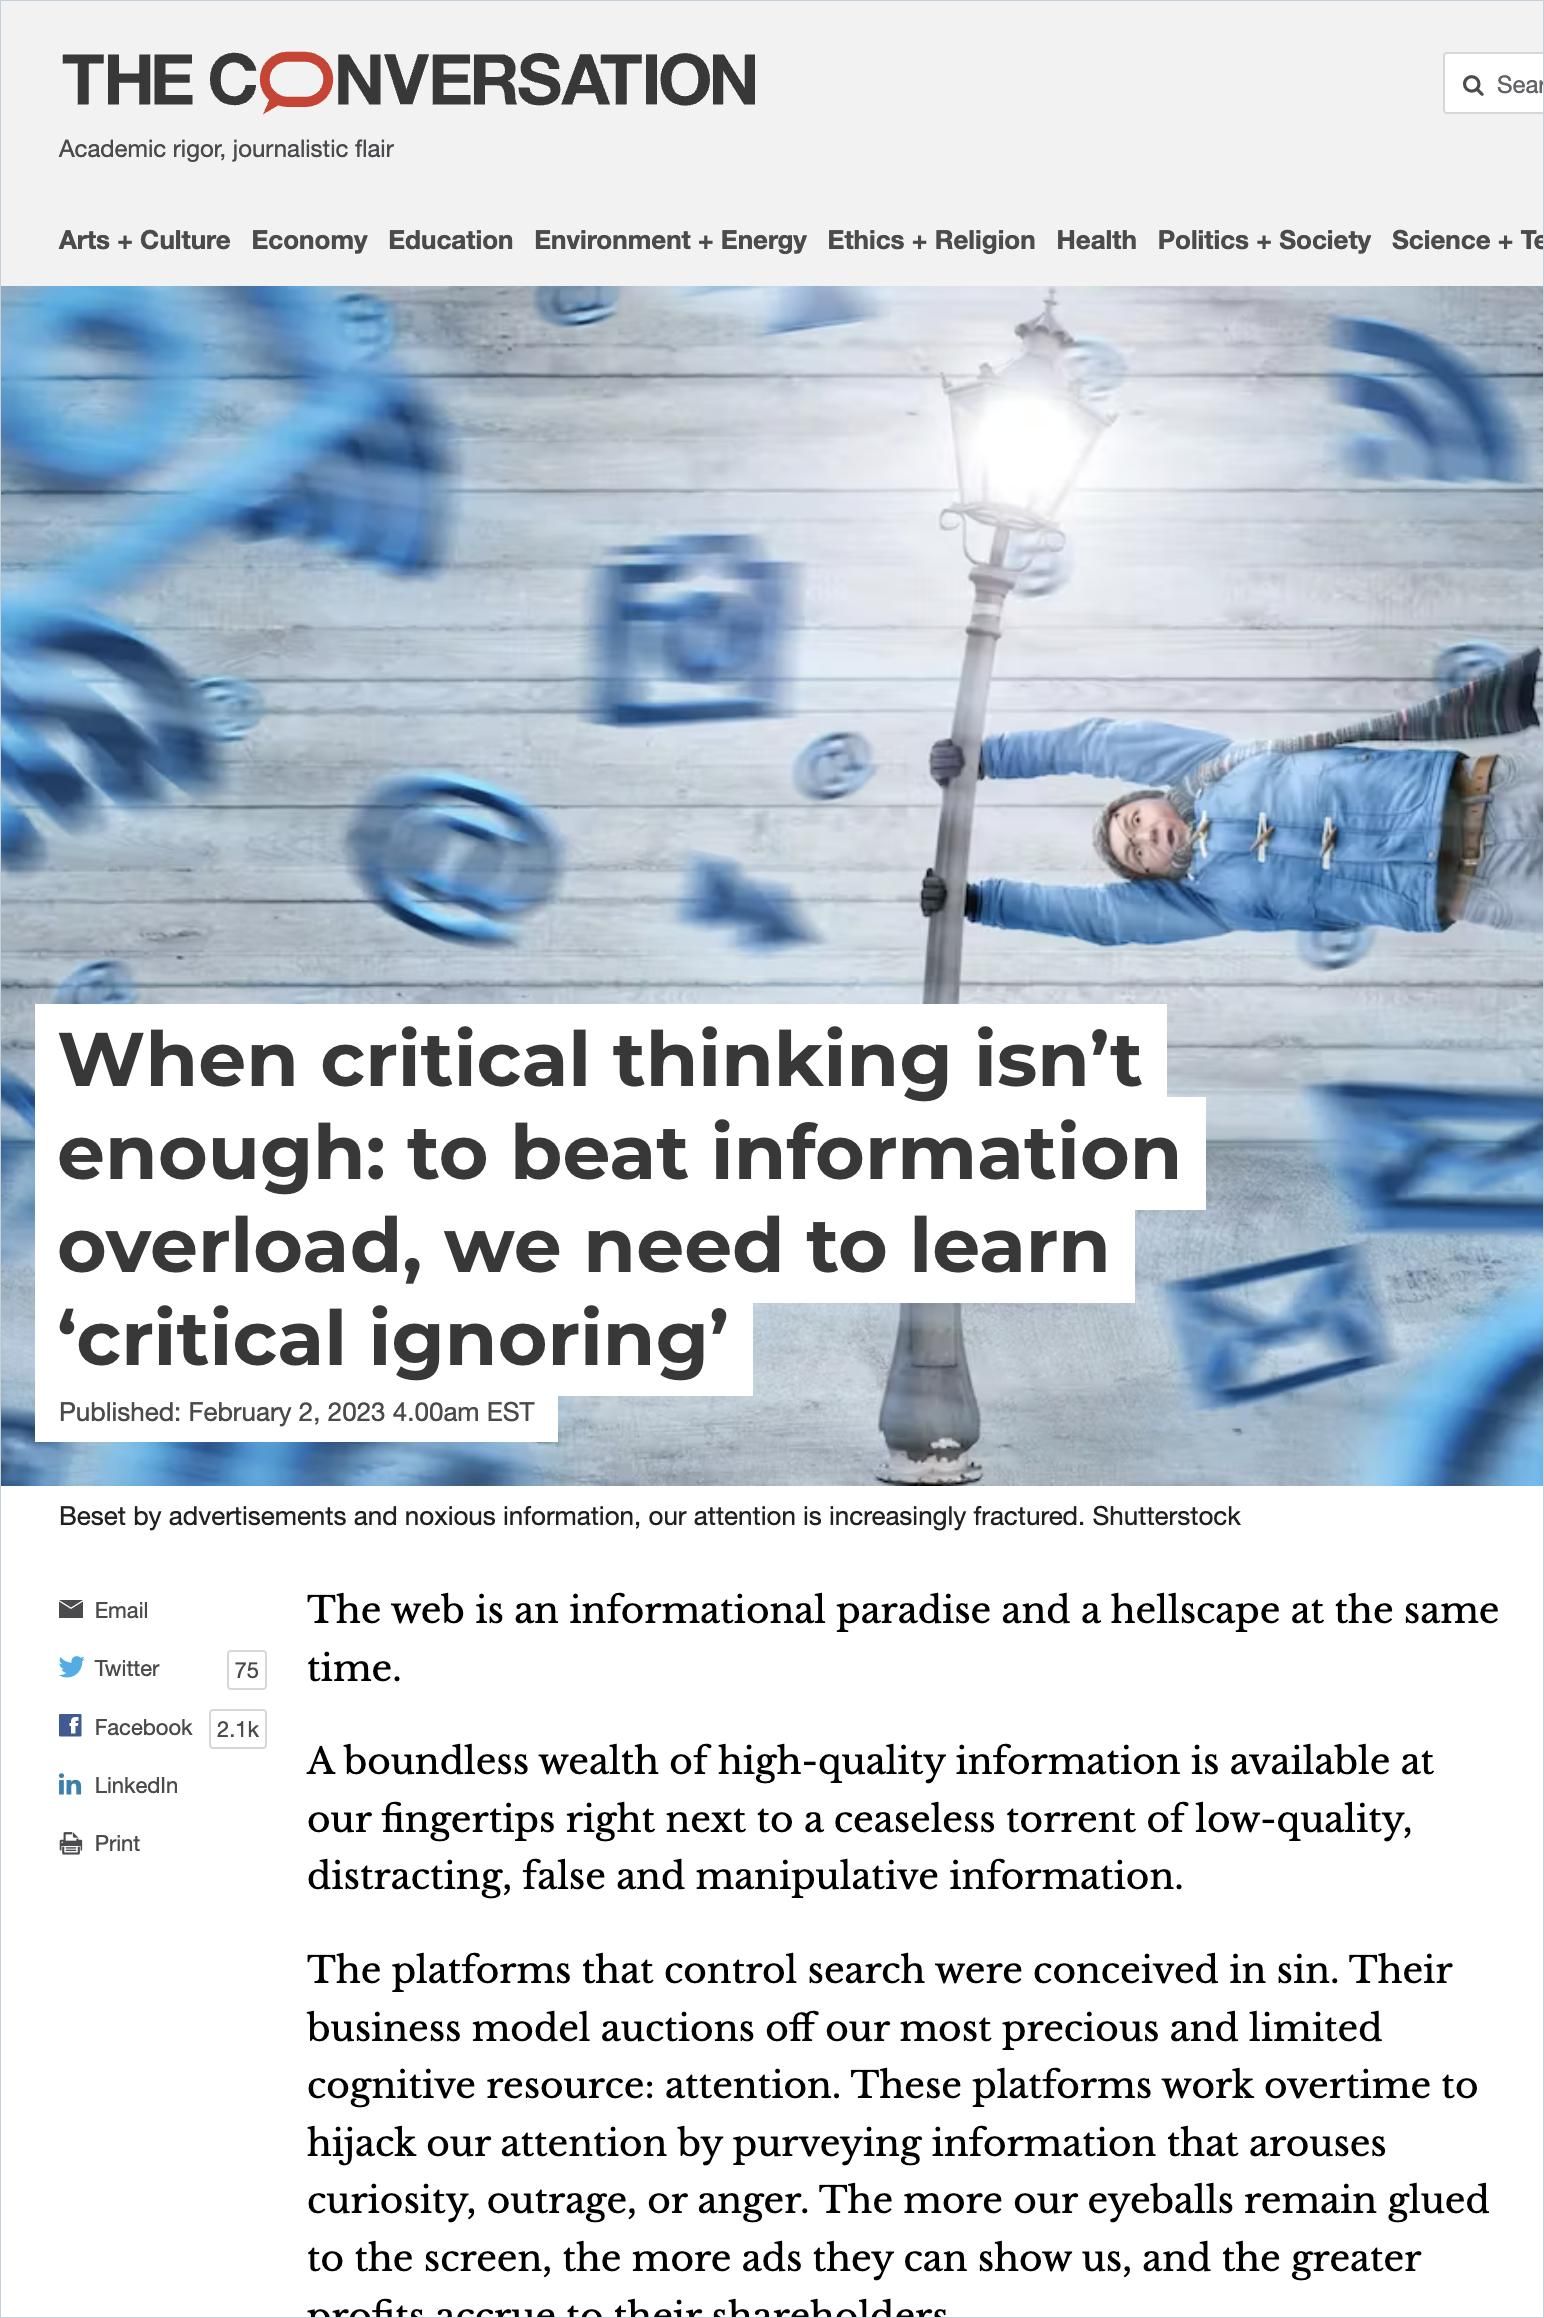 Image of: When Critical Thinking Isn’t Enough: To Beat Information Overload, We Need to Learn “Critical Ignoring”